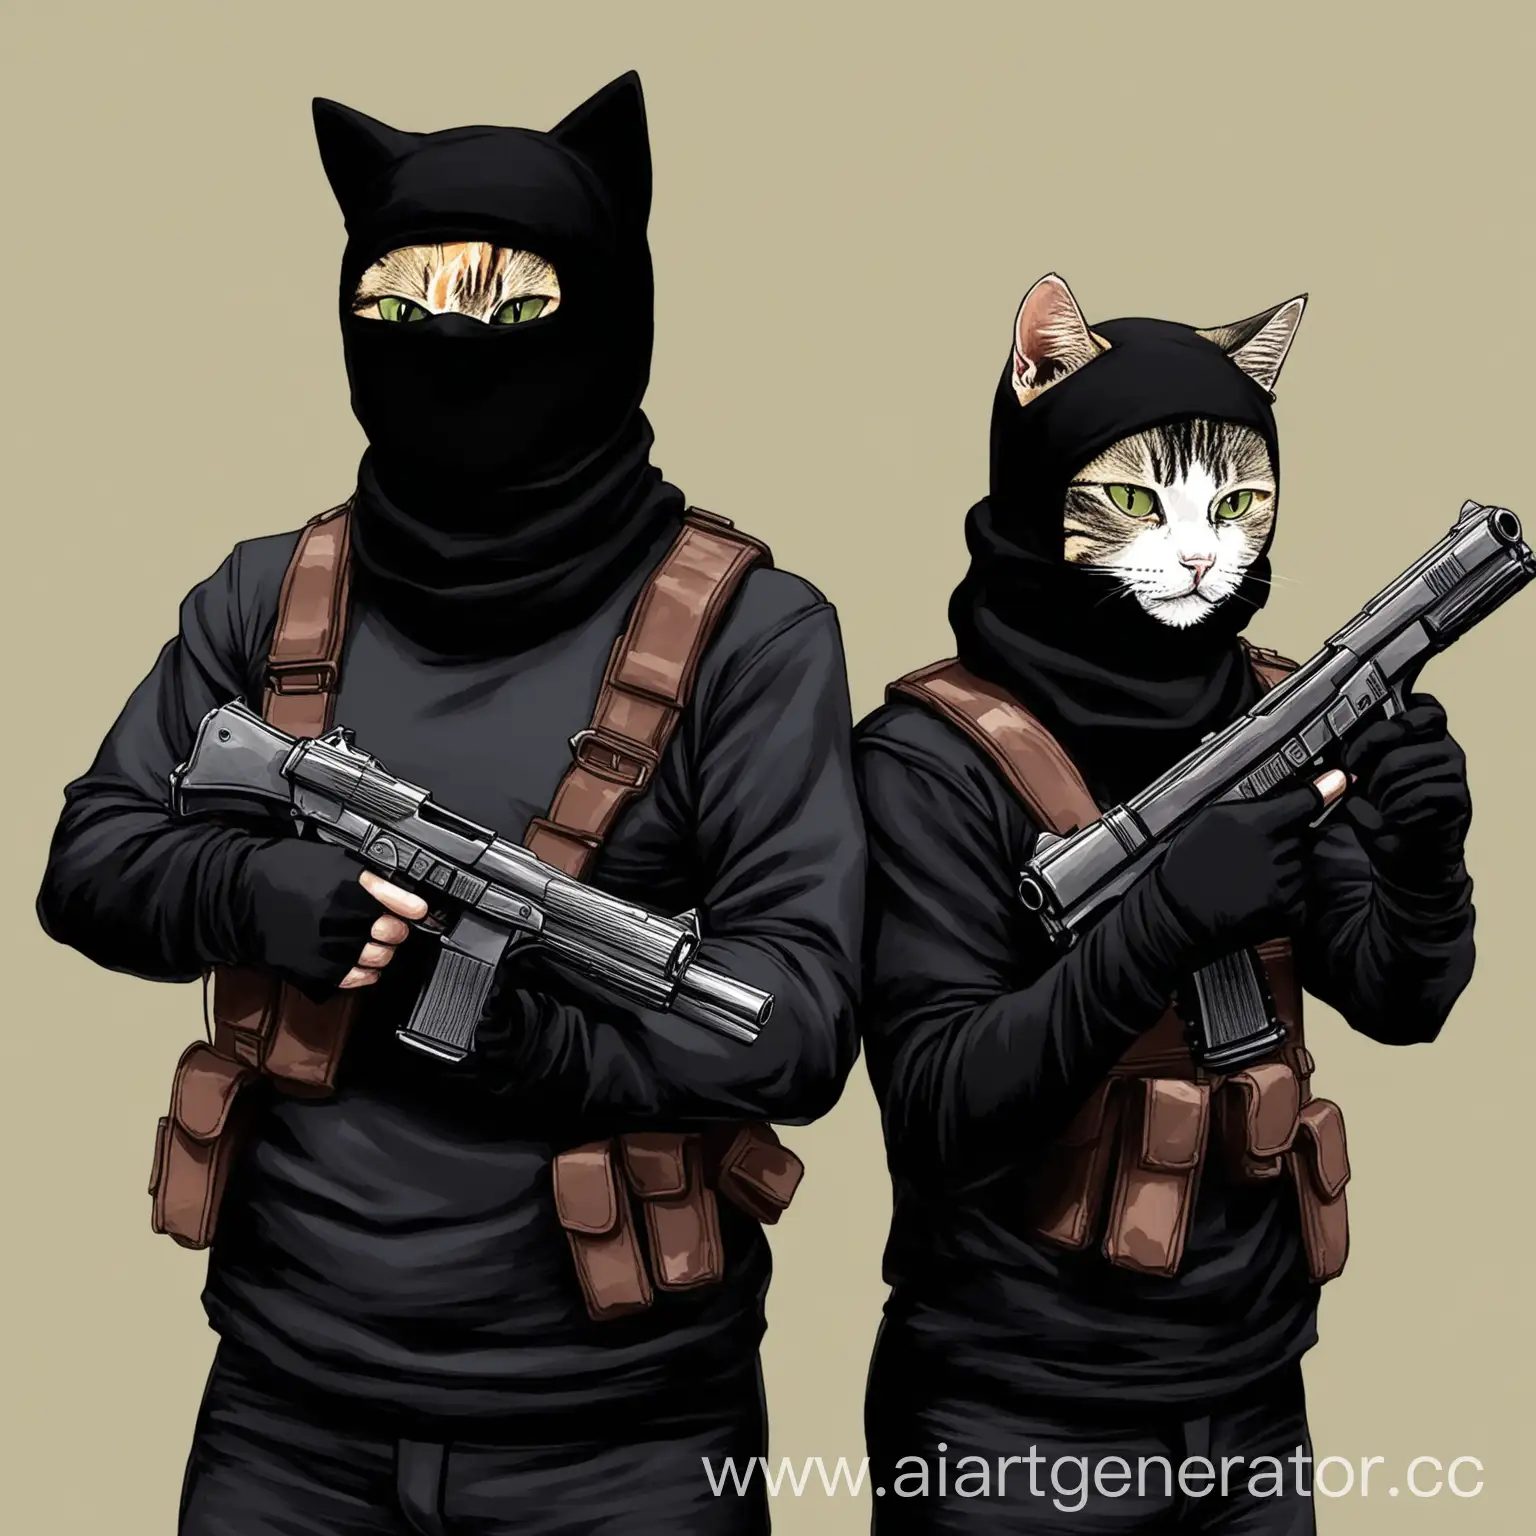 Criminal-Cats-in-Balaclavas-Armed-with-Pistols